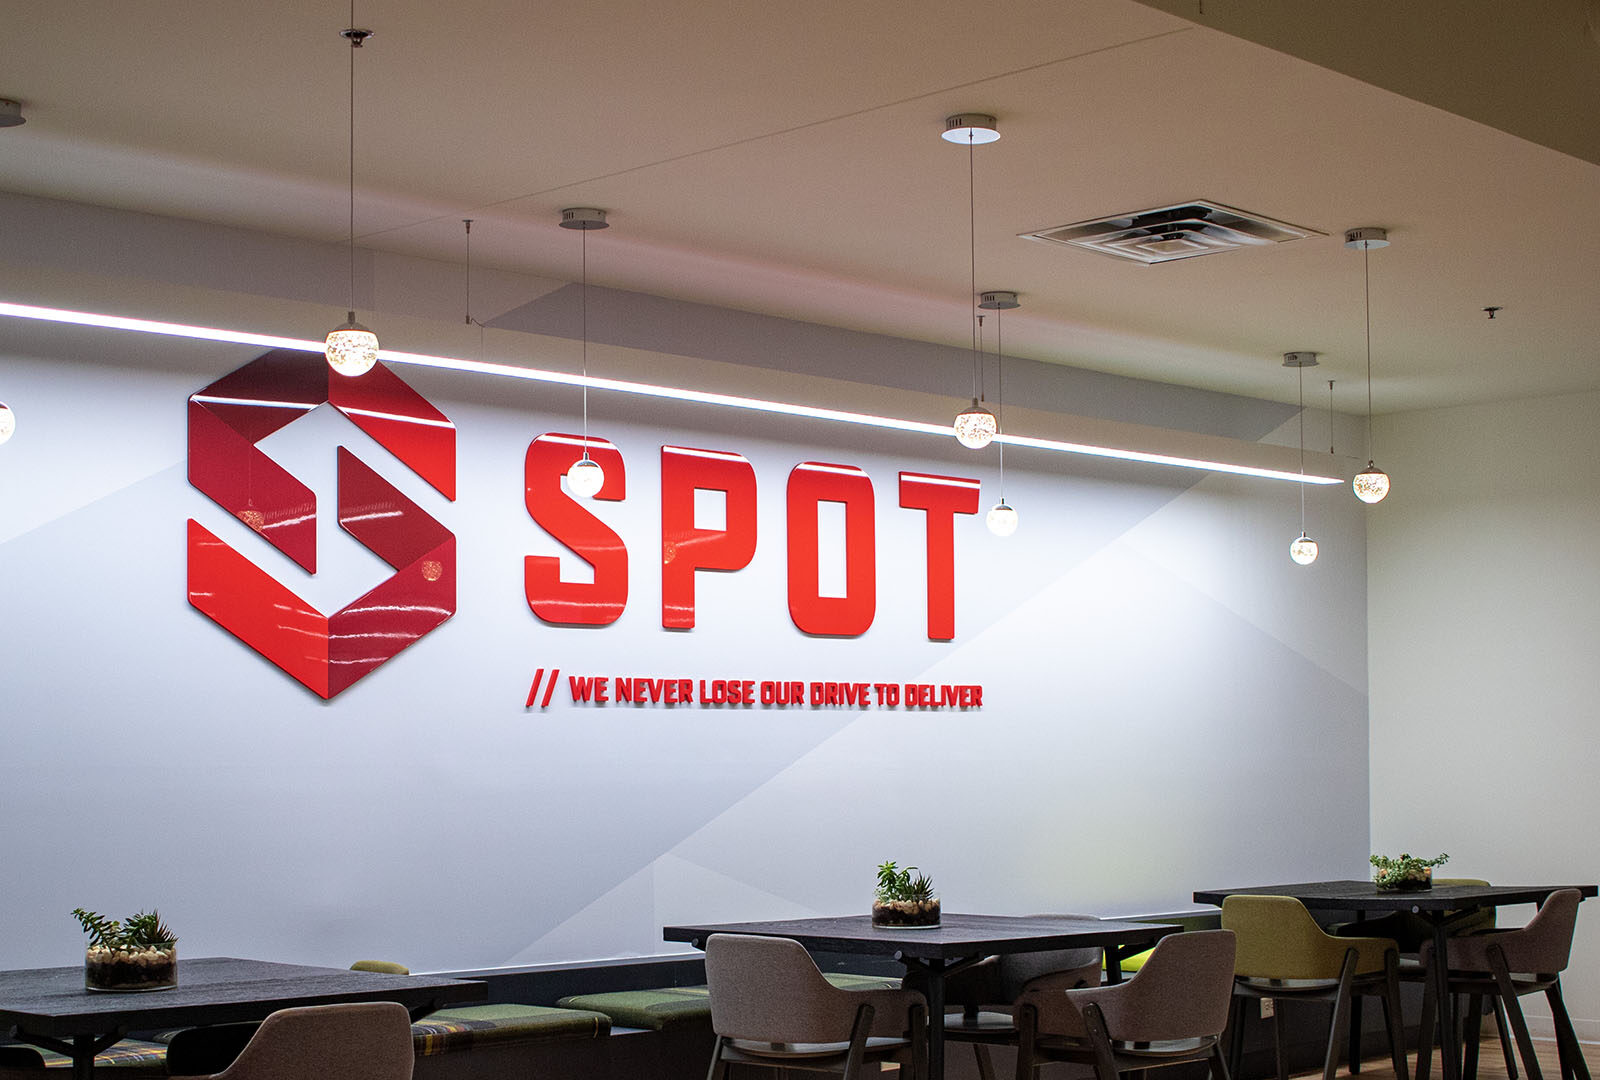 Wall at Spot's Indy location